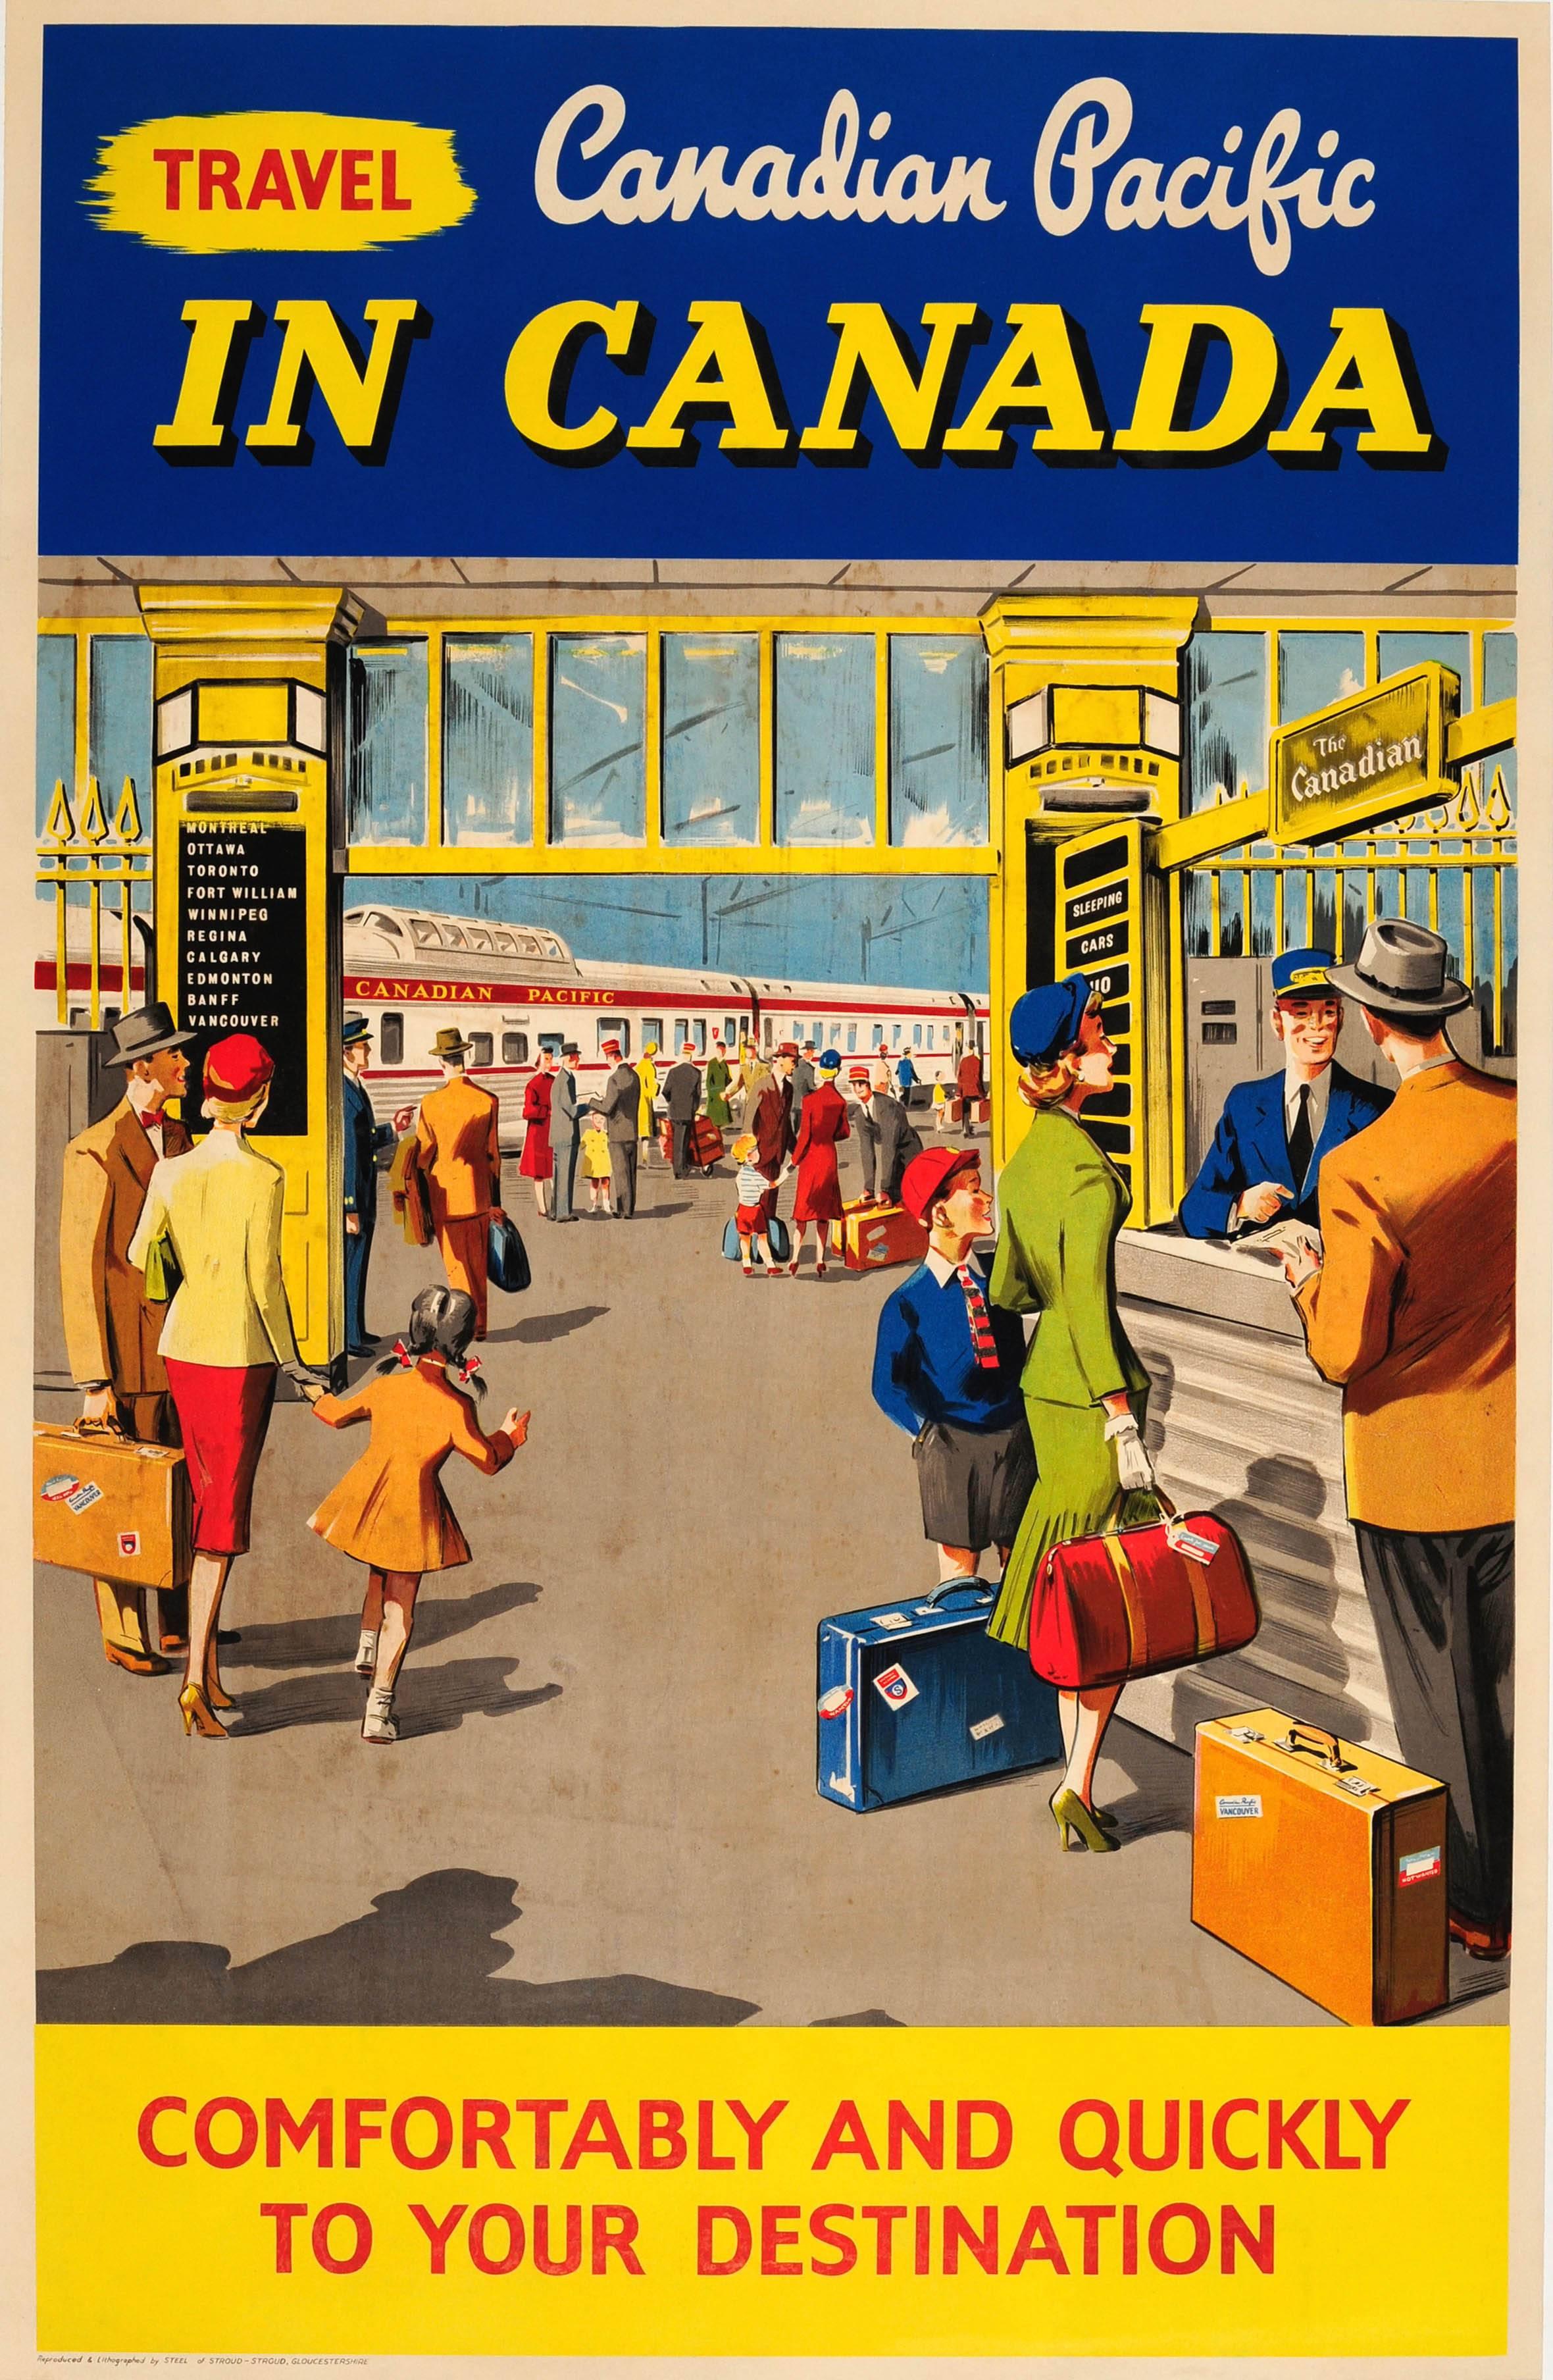 Unknown Print - Original Vintage Travel Advertising Poster - Travel Canadian Pacific In Canada